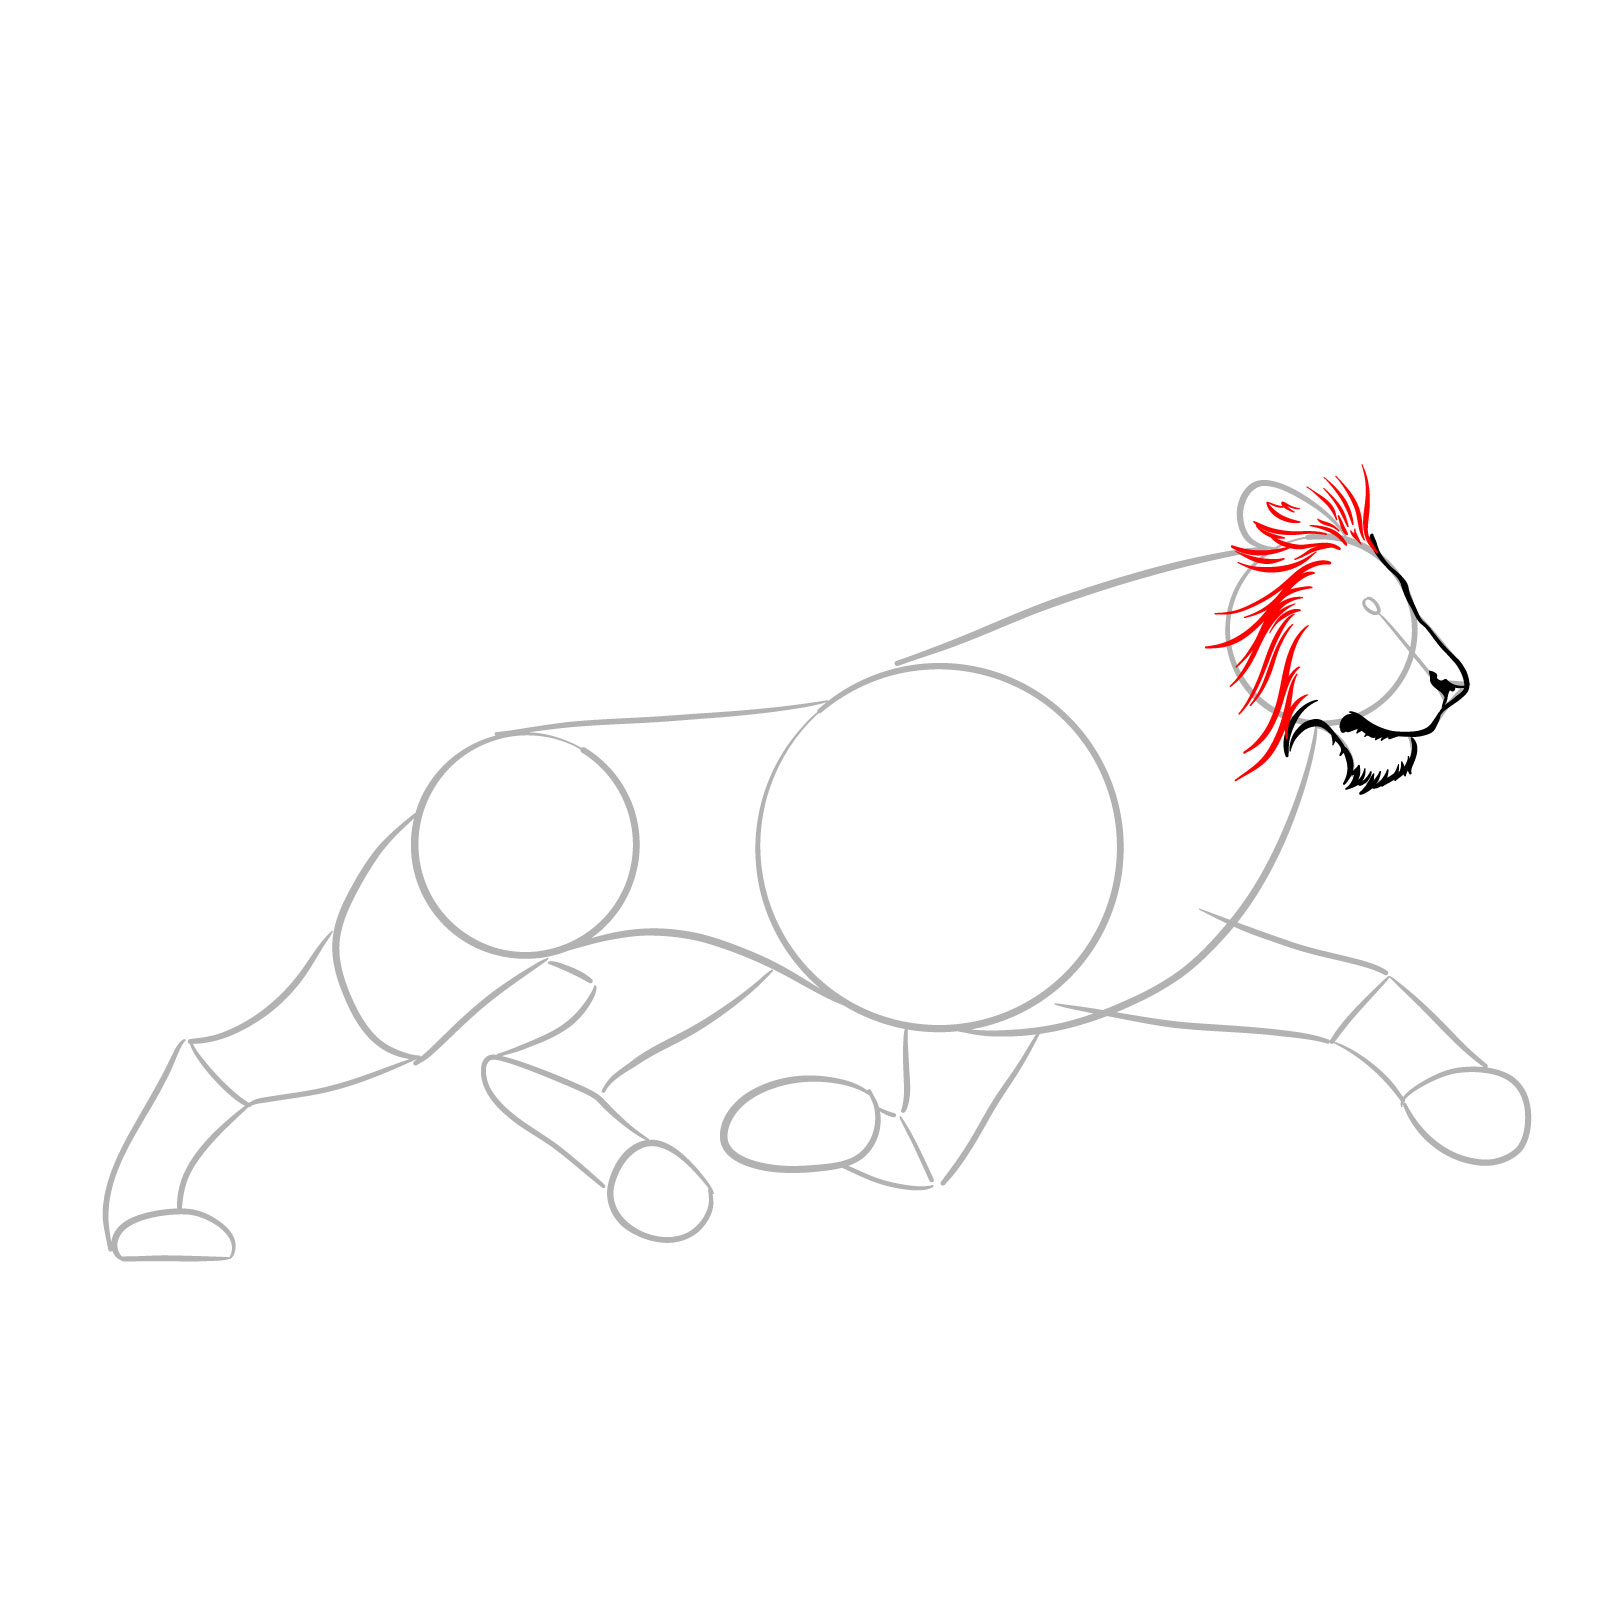 Illustrating the detailed facial contours of a running lion - step 05